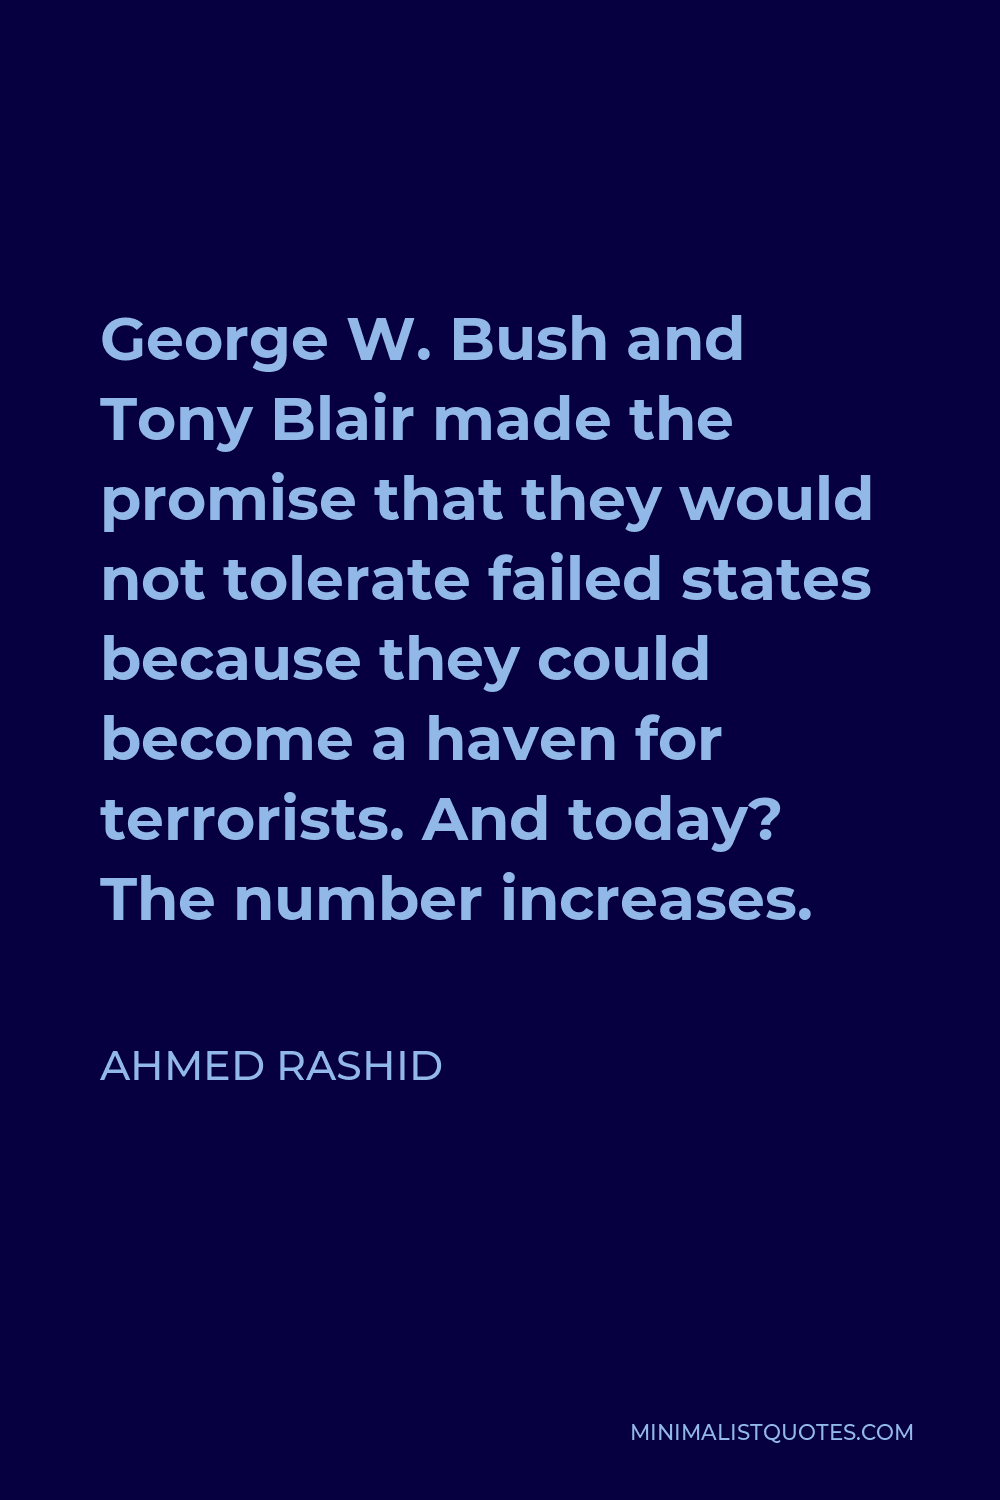 Ahmed Rashid Quote - George W. Bush and Tony Blair made the promise that they would not tolerate failed states because they could become a haven for terrorists. And today? The number increases.